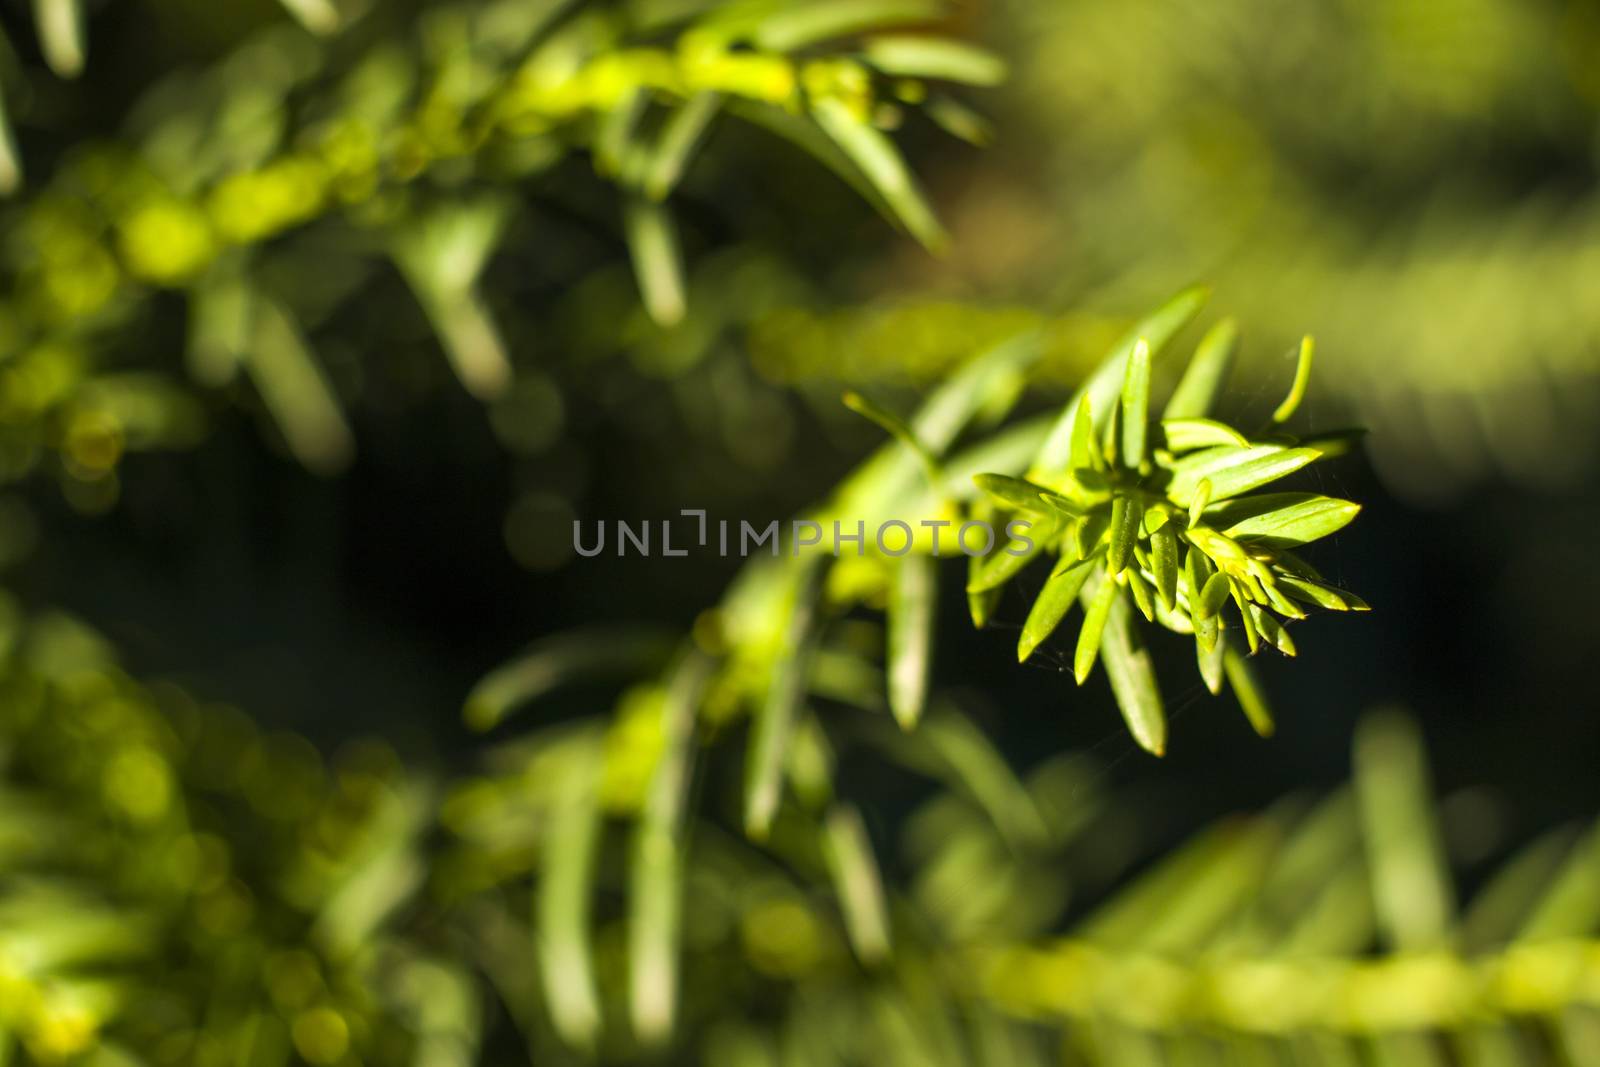 Yaw tree leaves close-up and macro, green color background, Tacus Cuspidata by Taidundua